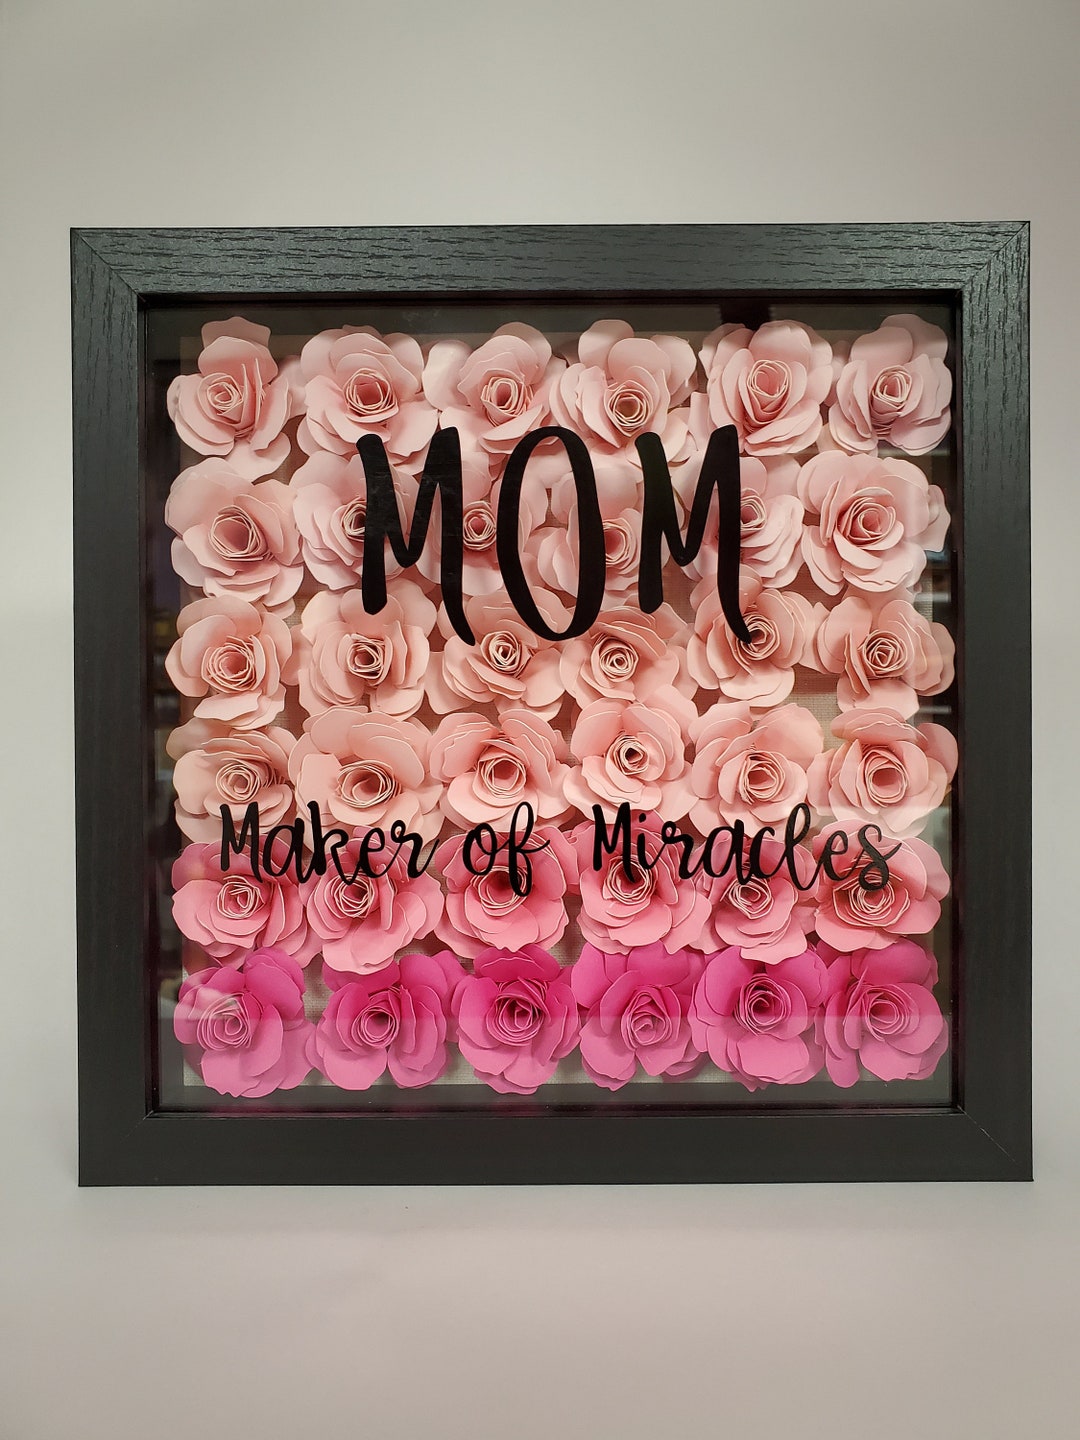 MOM Maker of Miracles - Etsy